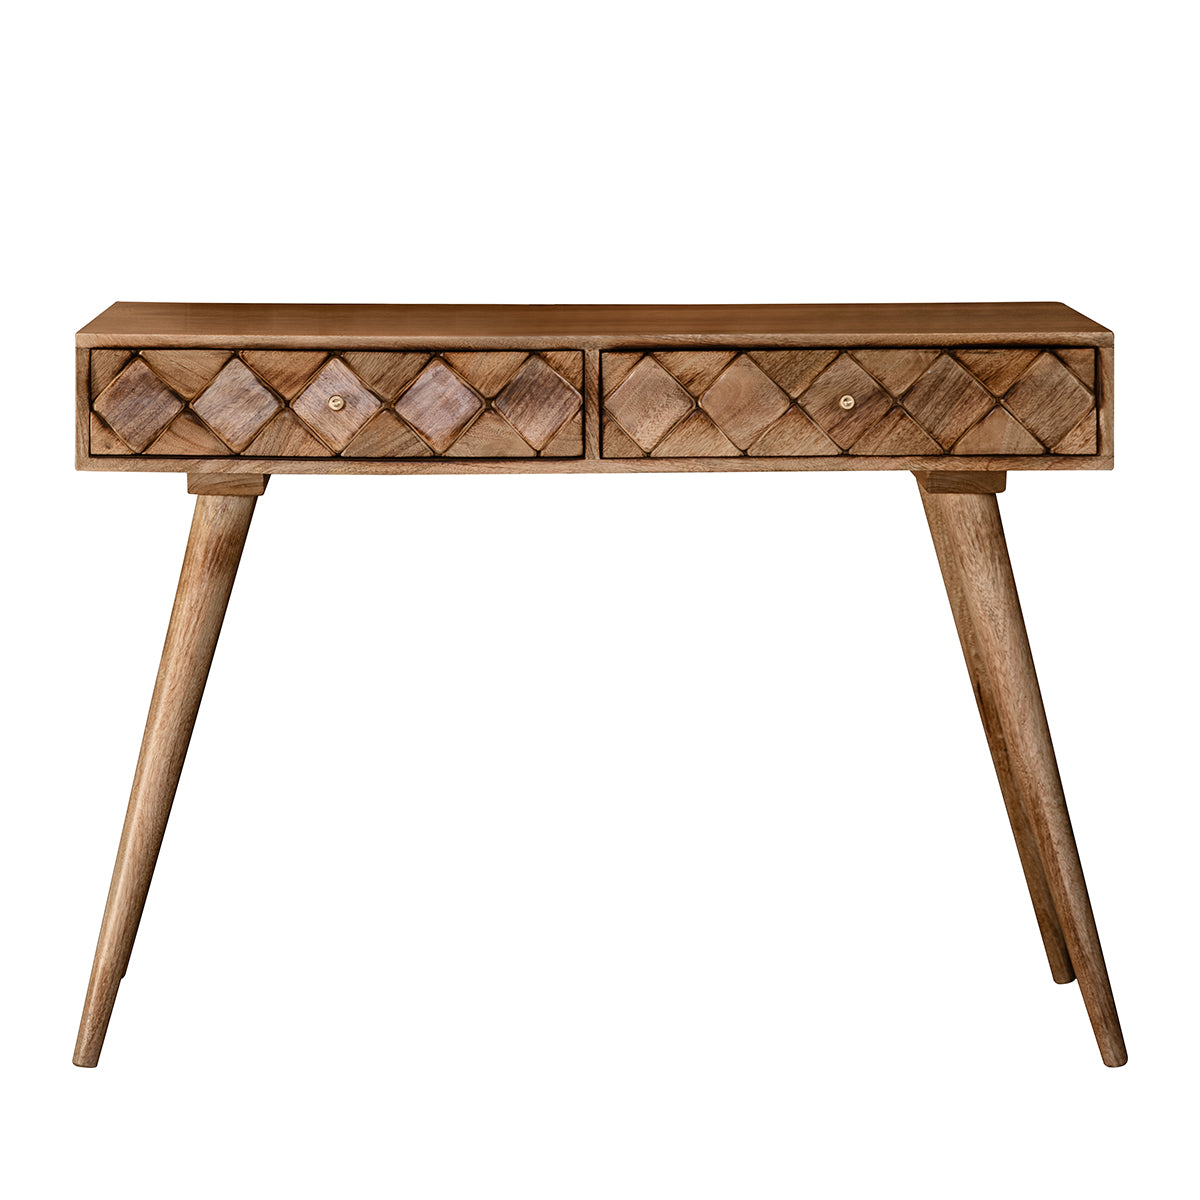 A Tuscany Console Table Burn Wax 1100x450x760mm from Kikiathome.co.uk, perfect for interior decor and home furniture.